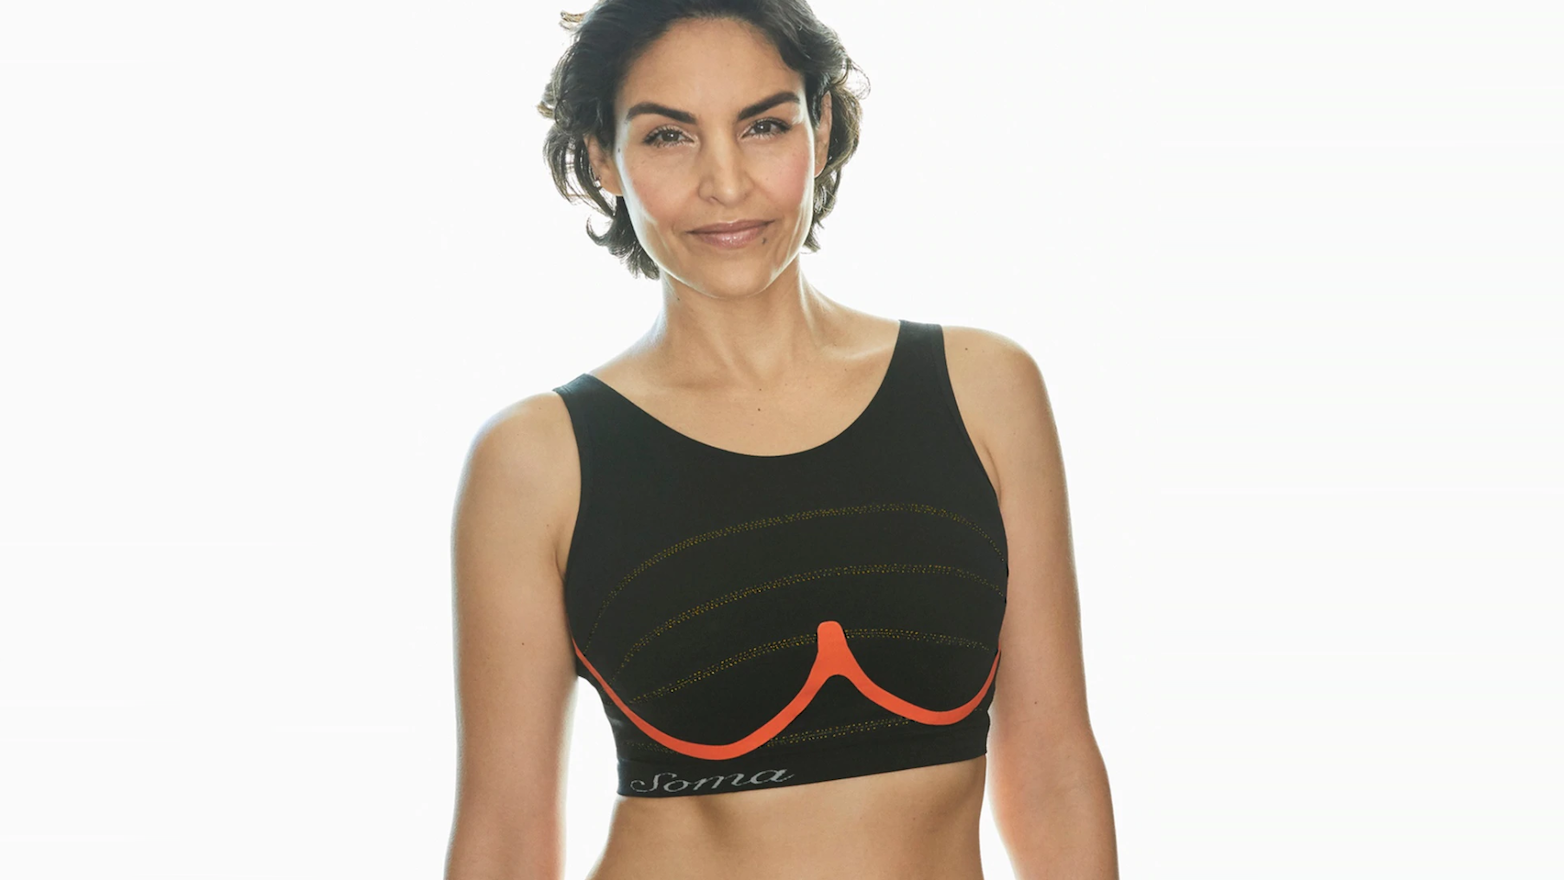 Soma's smart bra helps women find the right size